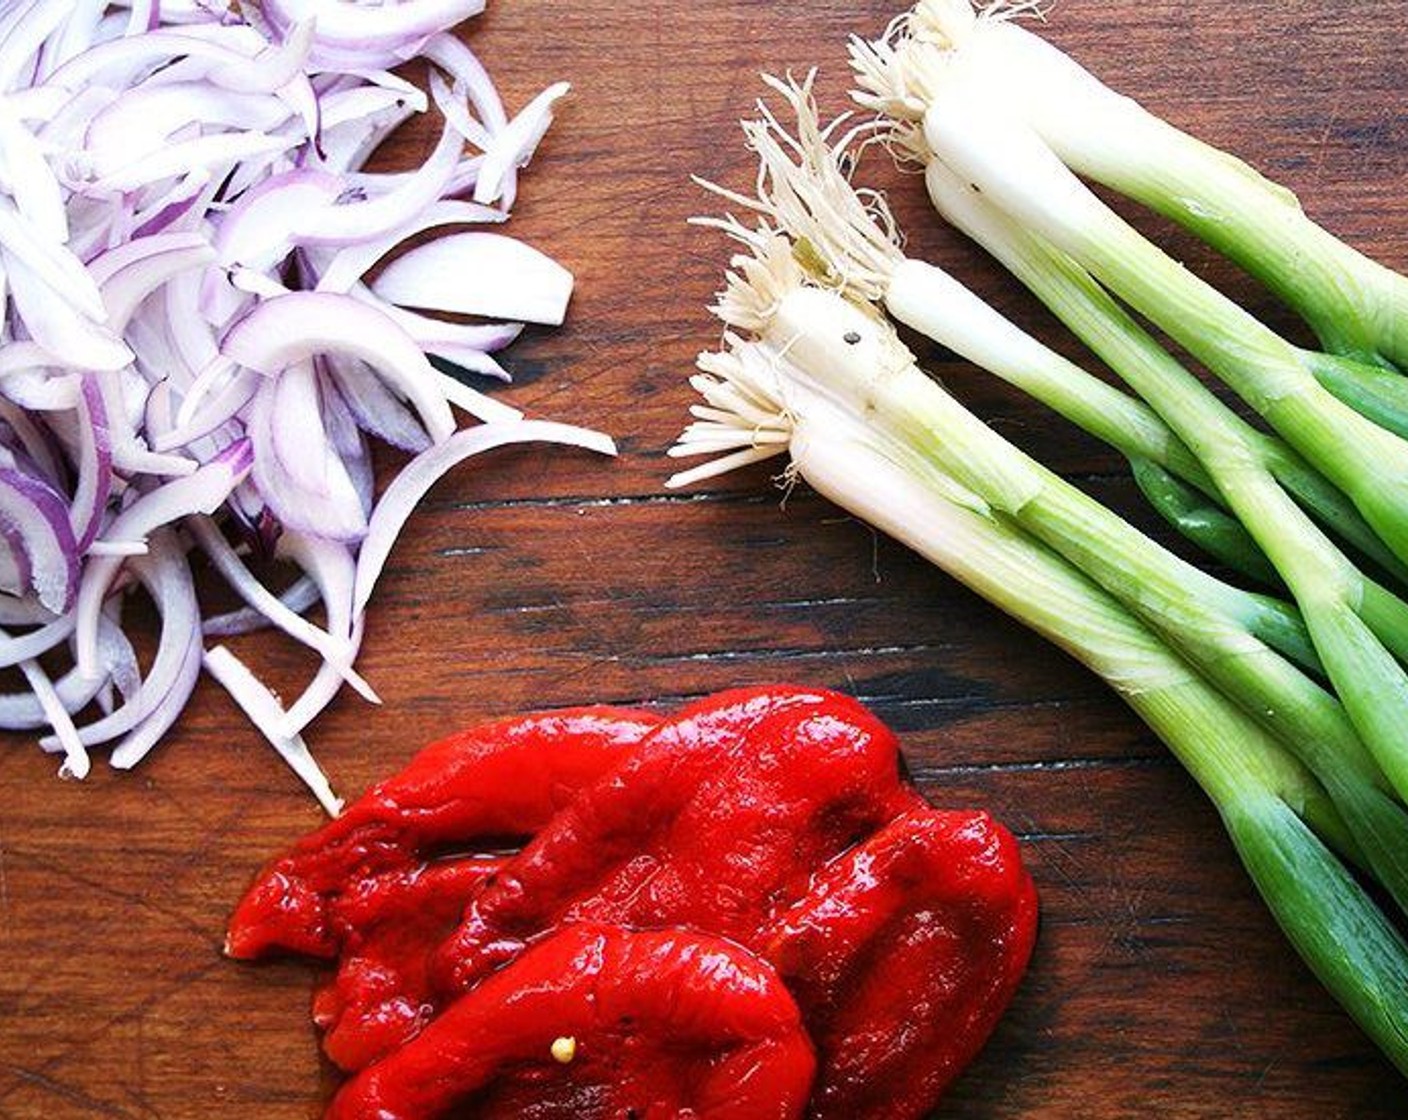 step 12 Add Roasted Red Pepper Strips (1 cup), Red Onion (1/2 cup), Scallion (1 bunch) and Shelled Edamame (1 cup) to the bowl.